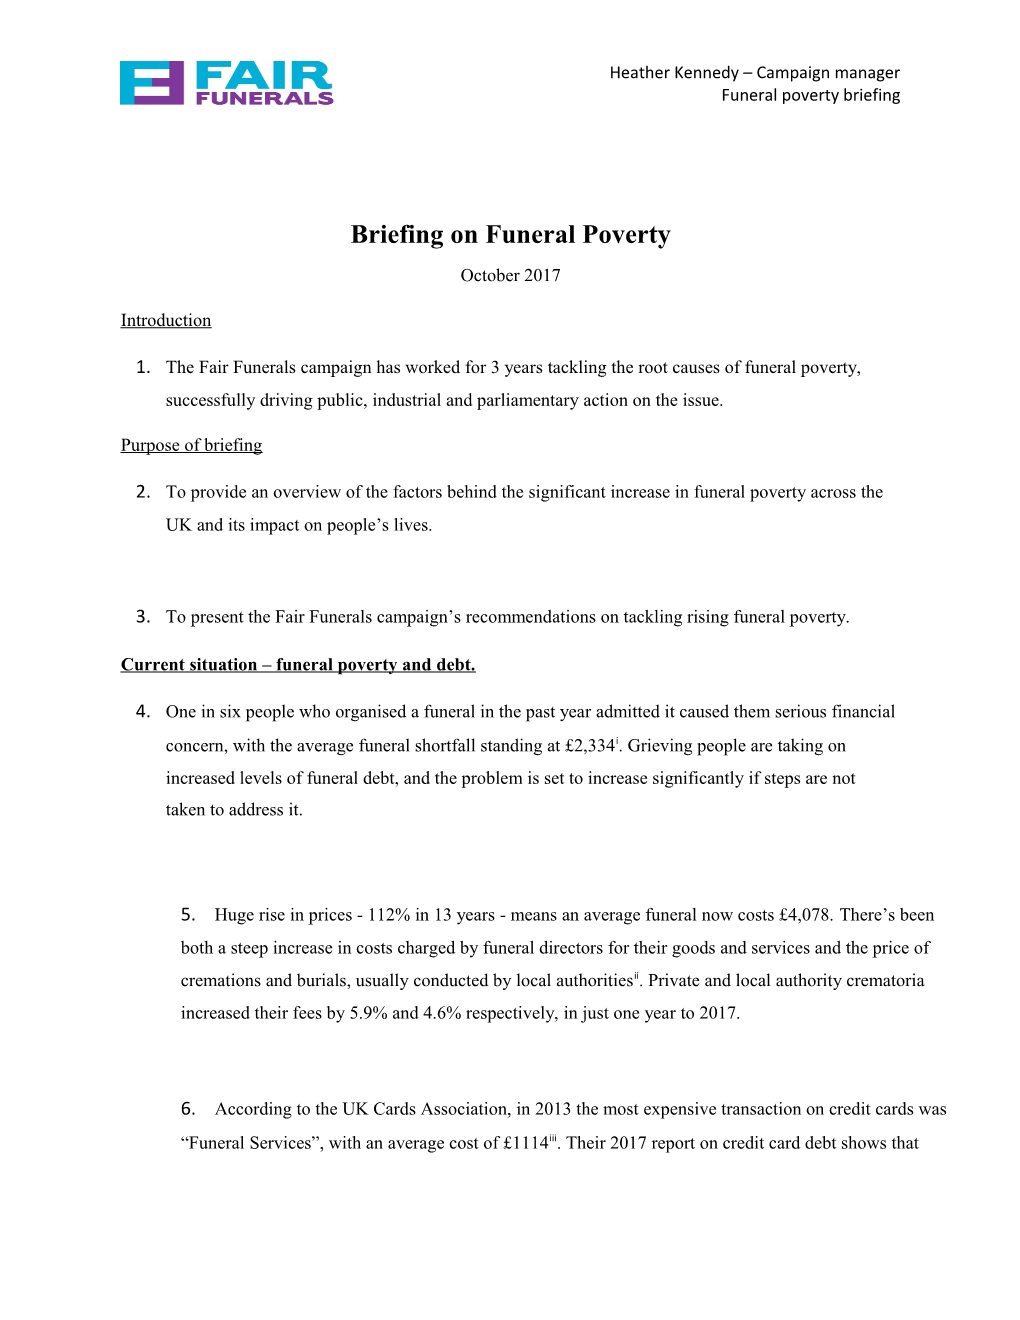 Briefing on Funeral Poverty